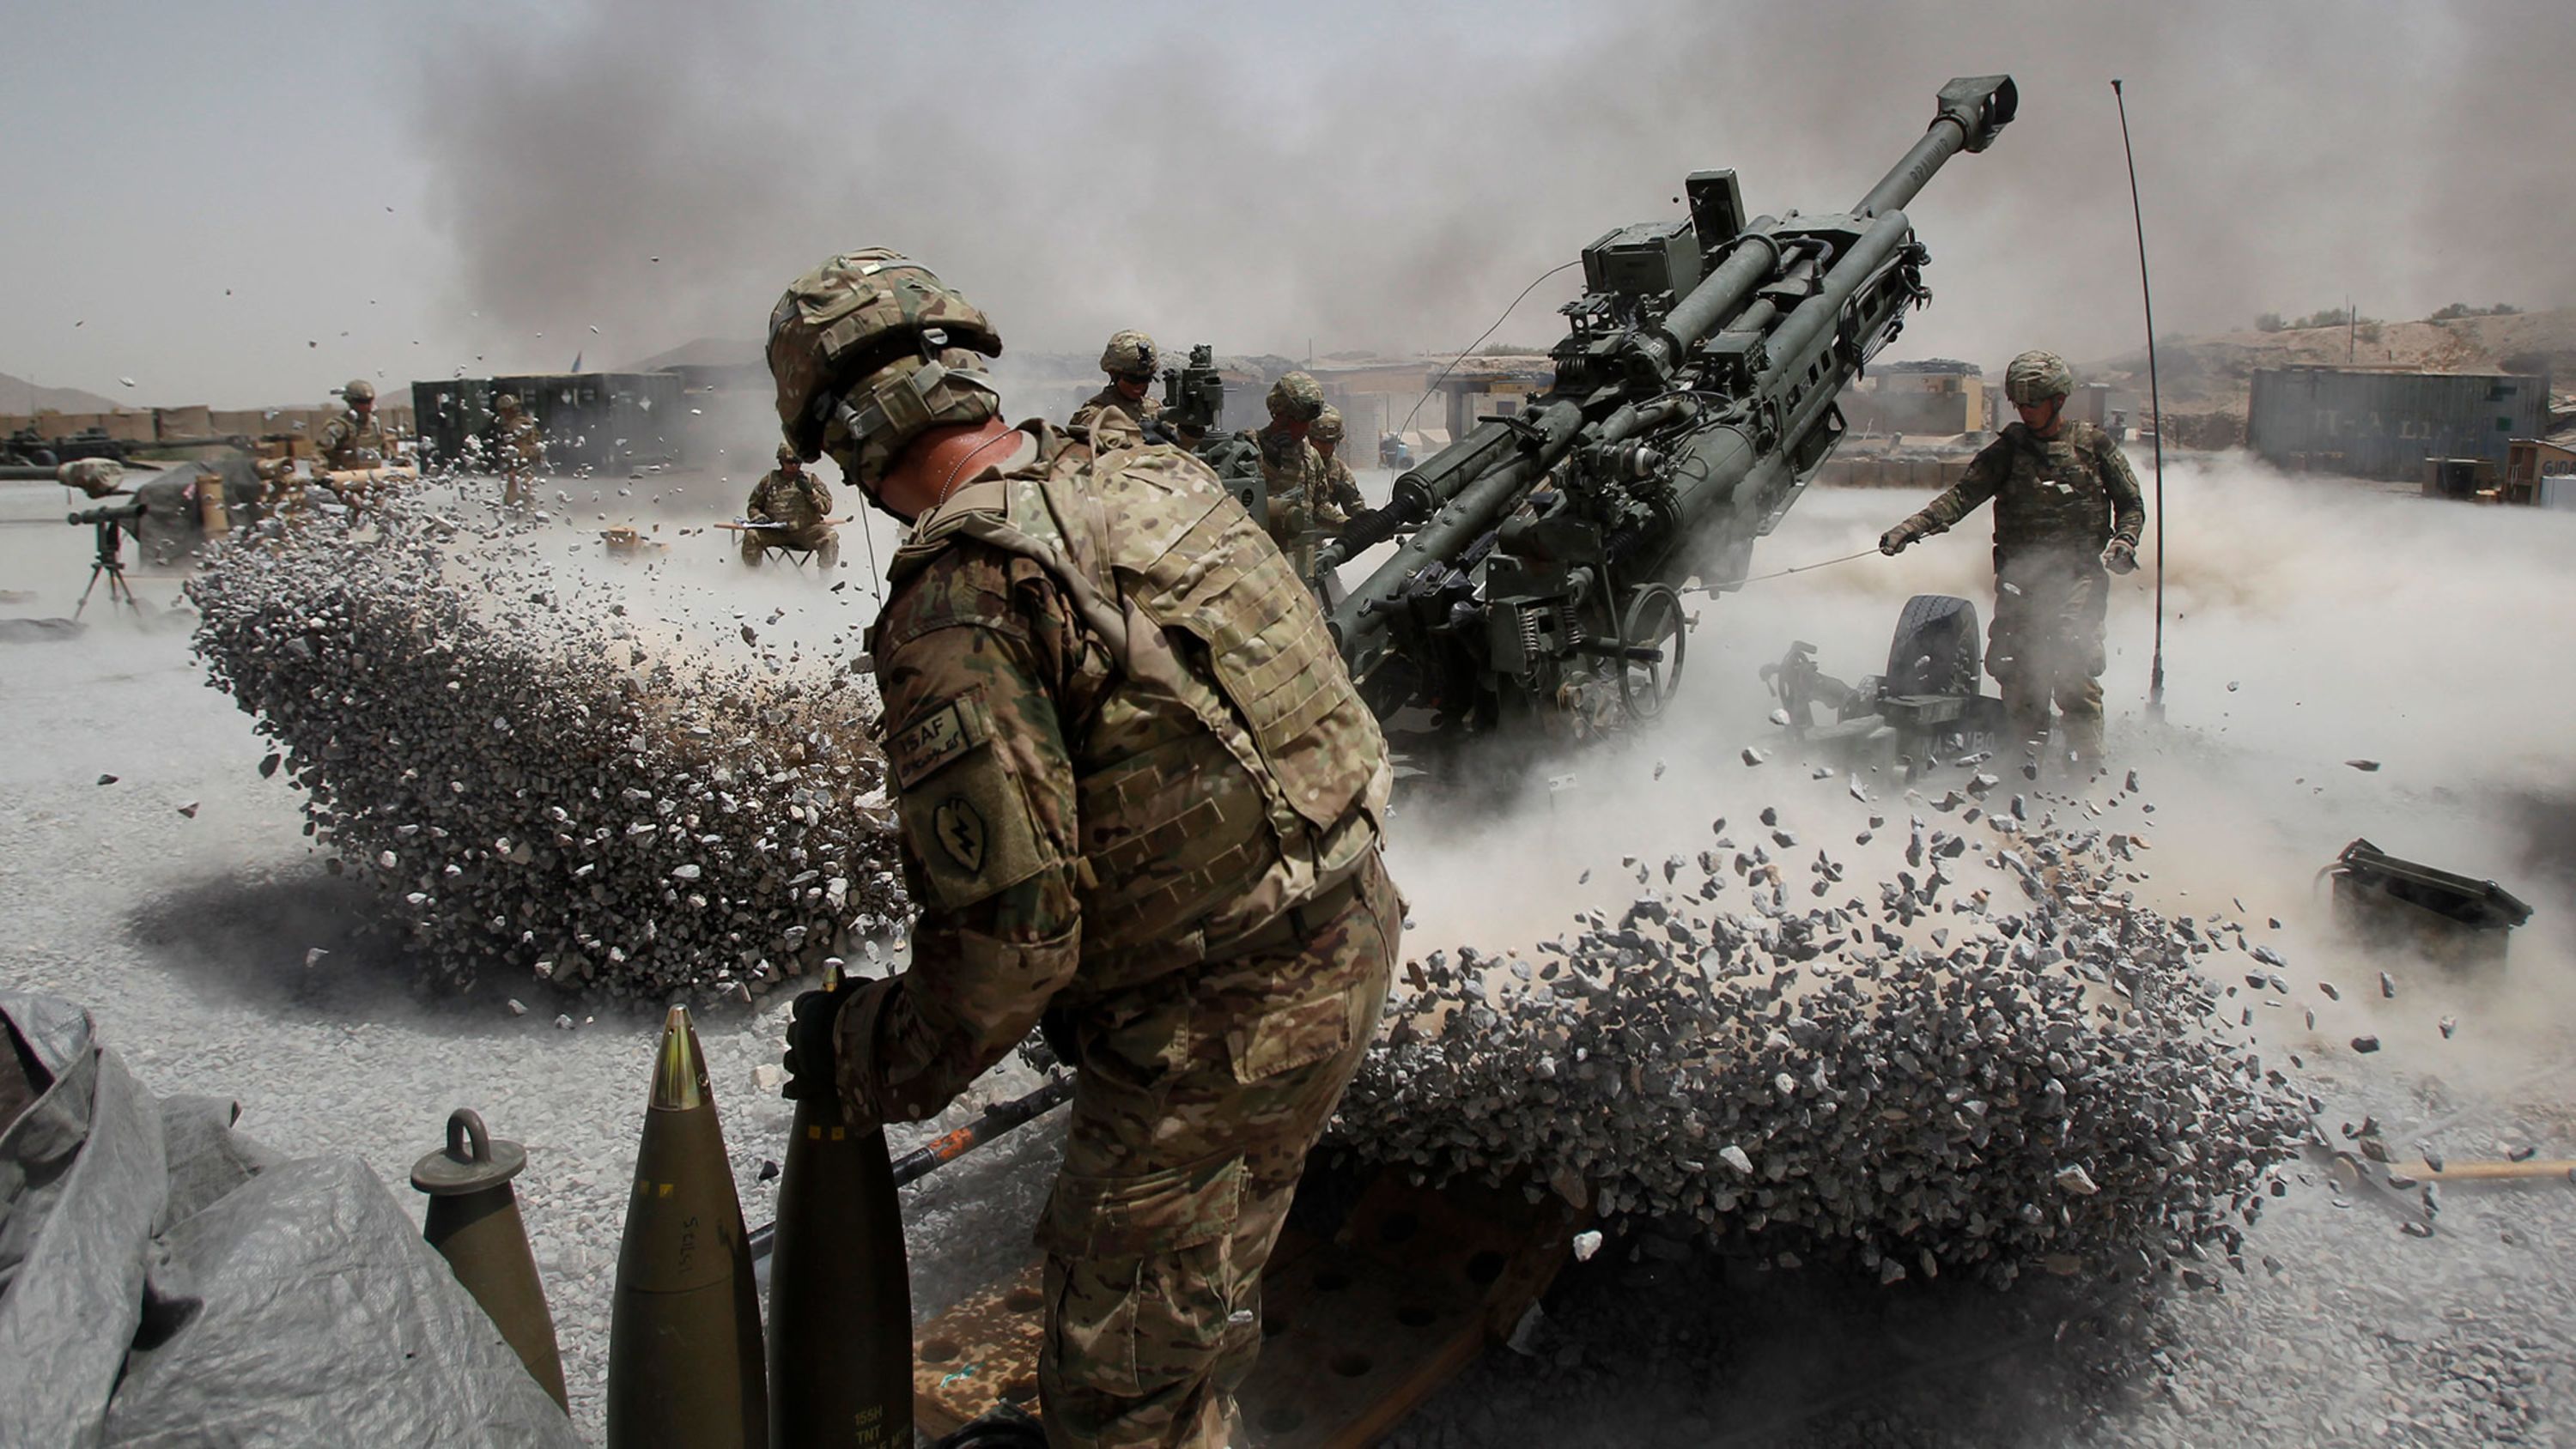 US soldiers fire artillery in Afghanistan's Kandahar province in June 2011. Operation Enduring Freedom was launched in October 2001 to stop the Taliban regime from providing a safe haven to al Qaeda and to stop al Qaeda's use of Afghanistan as a base of operations for terrorist activities.